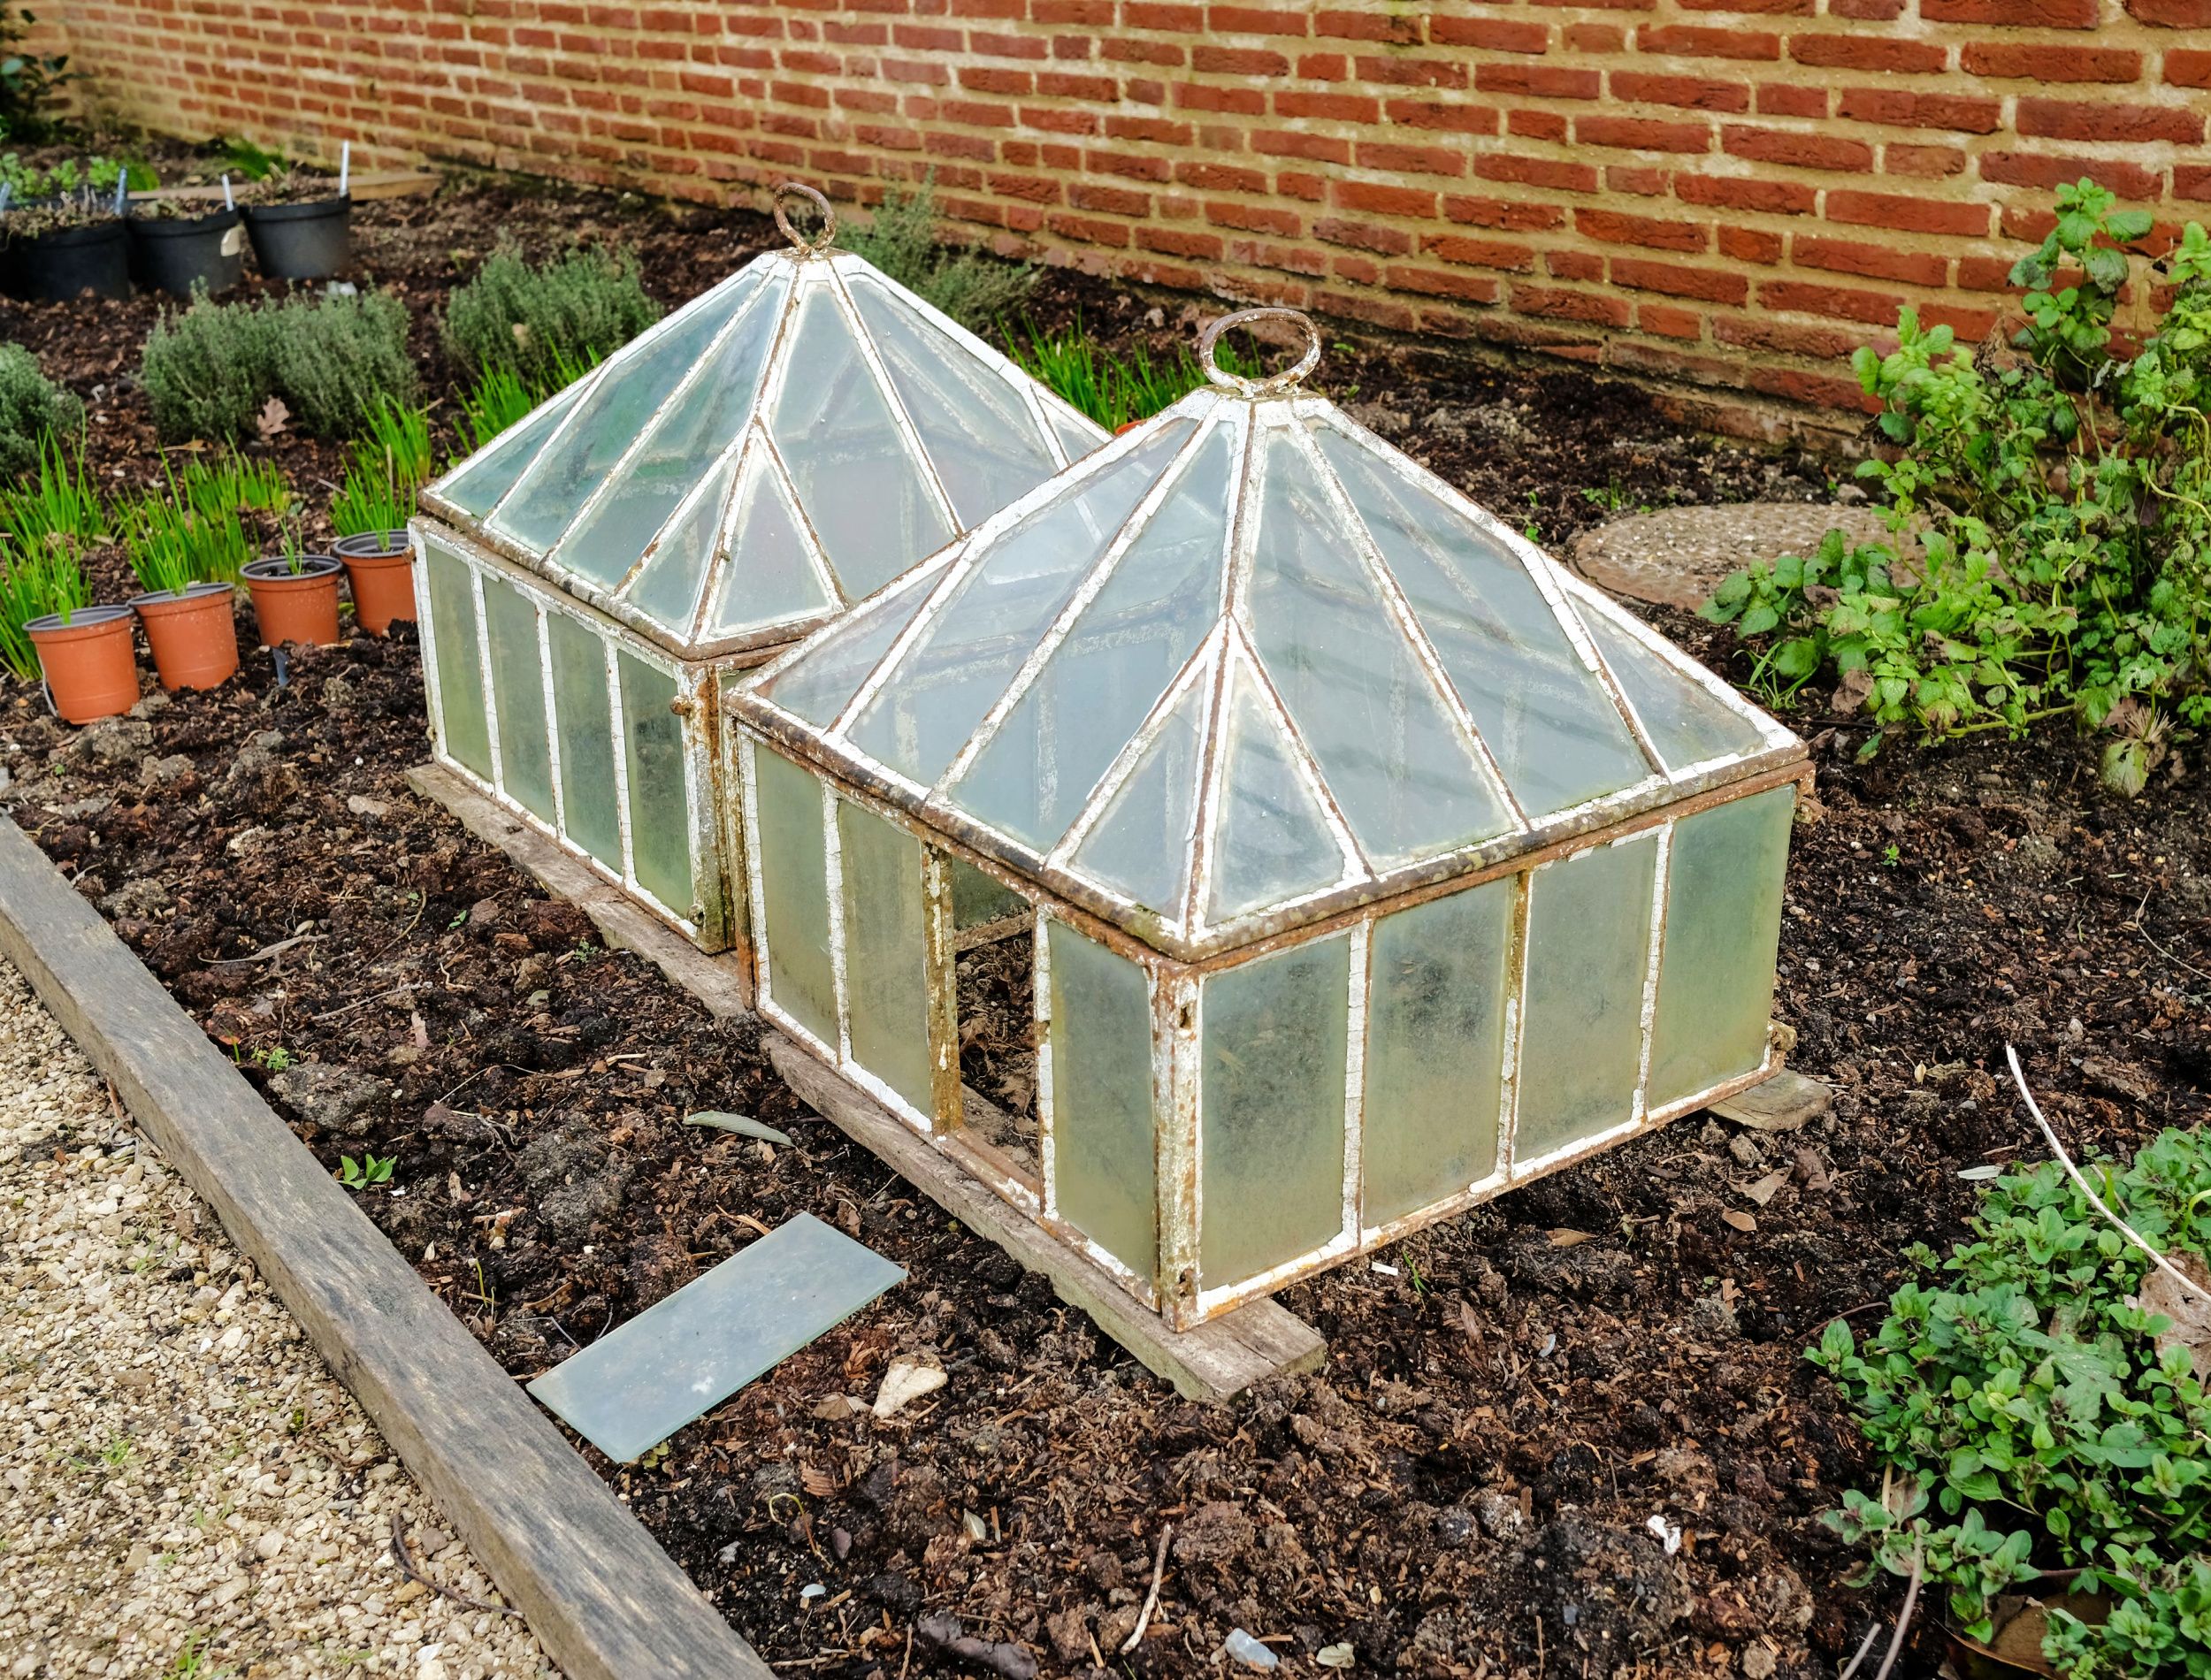 Ornate, old-style cold frames seen on an outside allotment plot. Lettuce are growing in the cold frames, one of the glass panels has fallen out onto the soil.